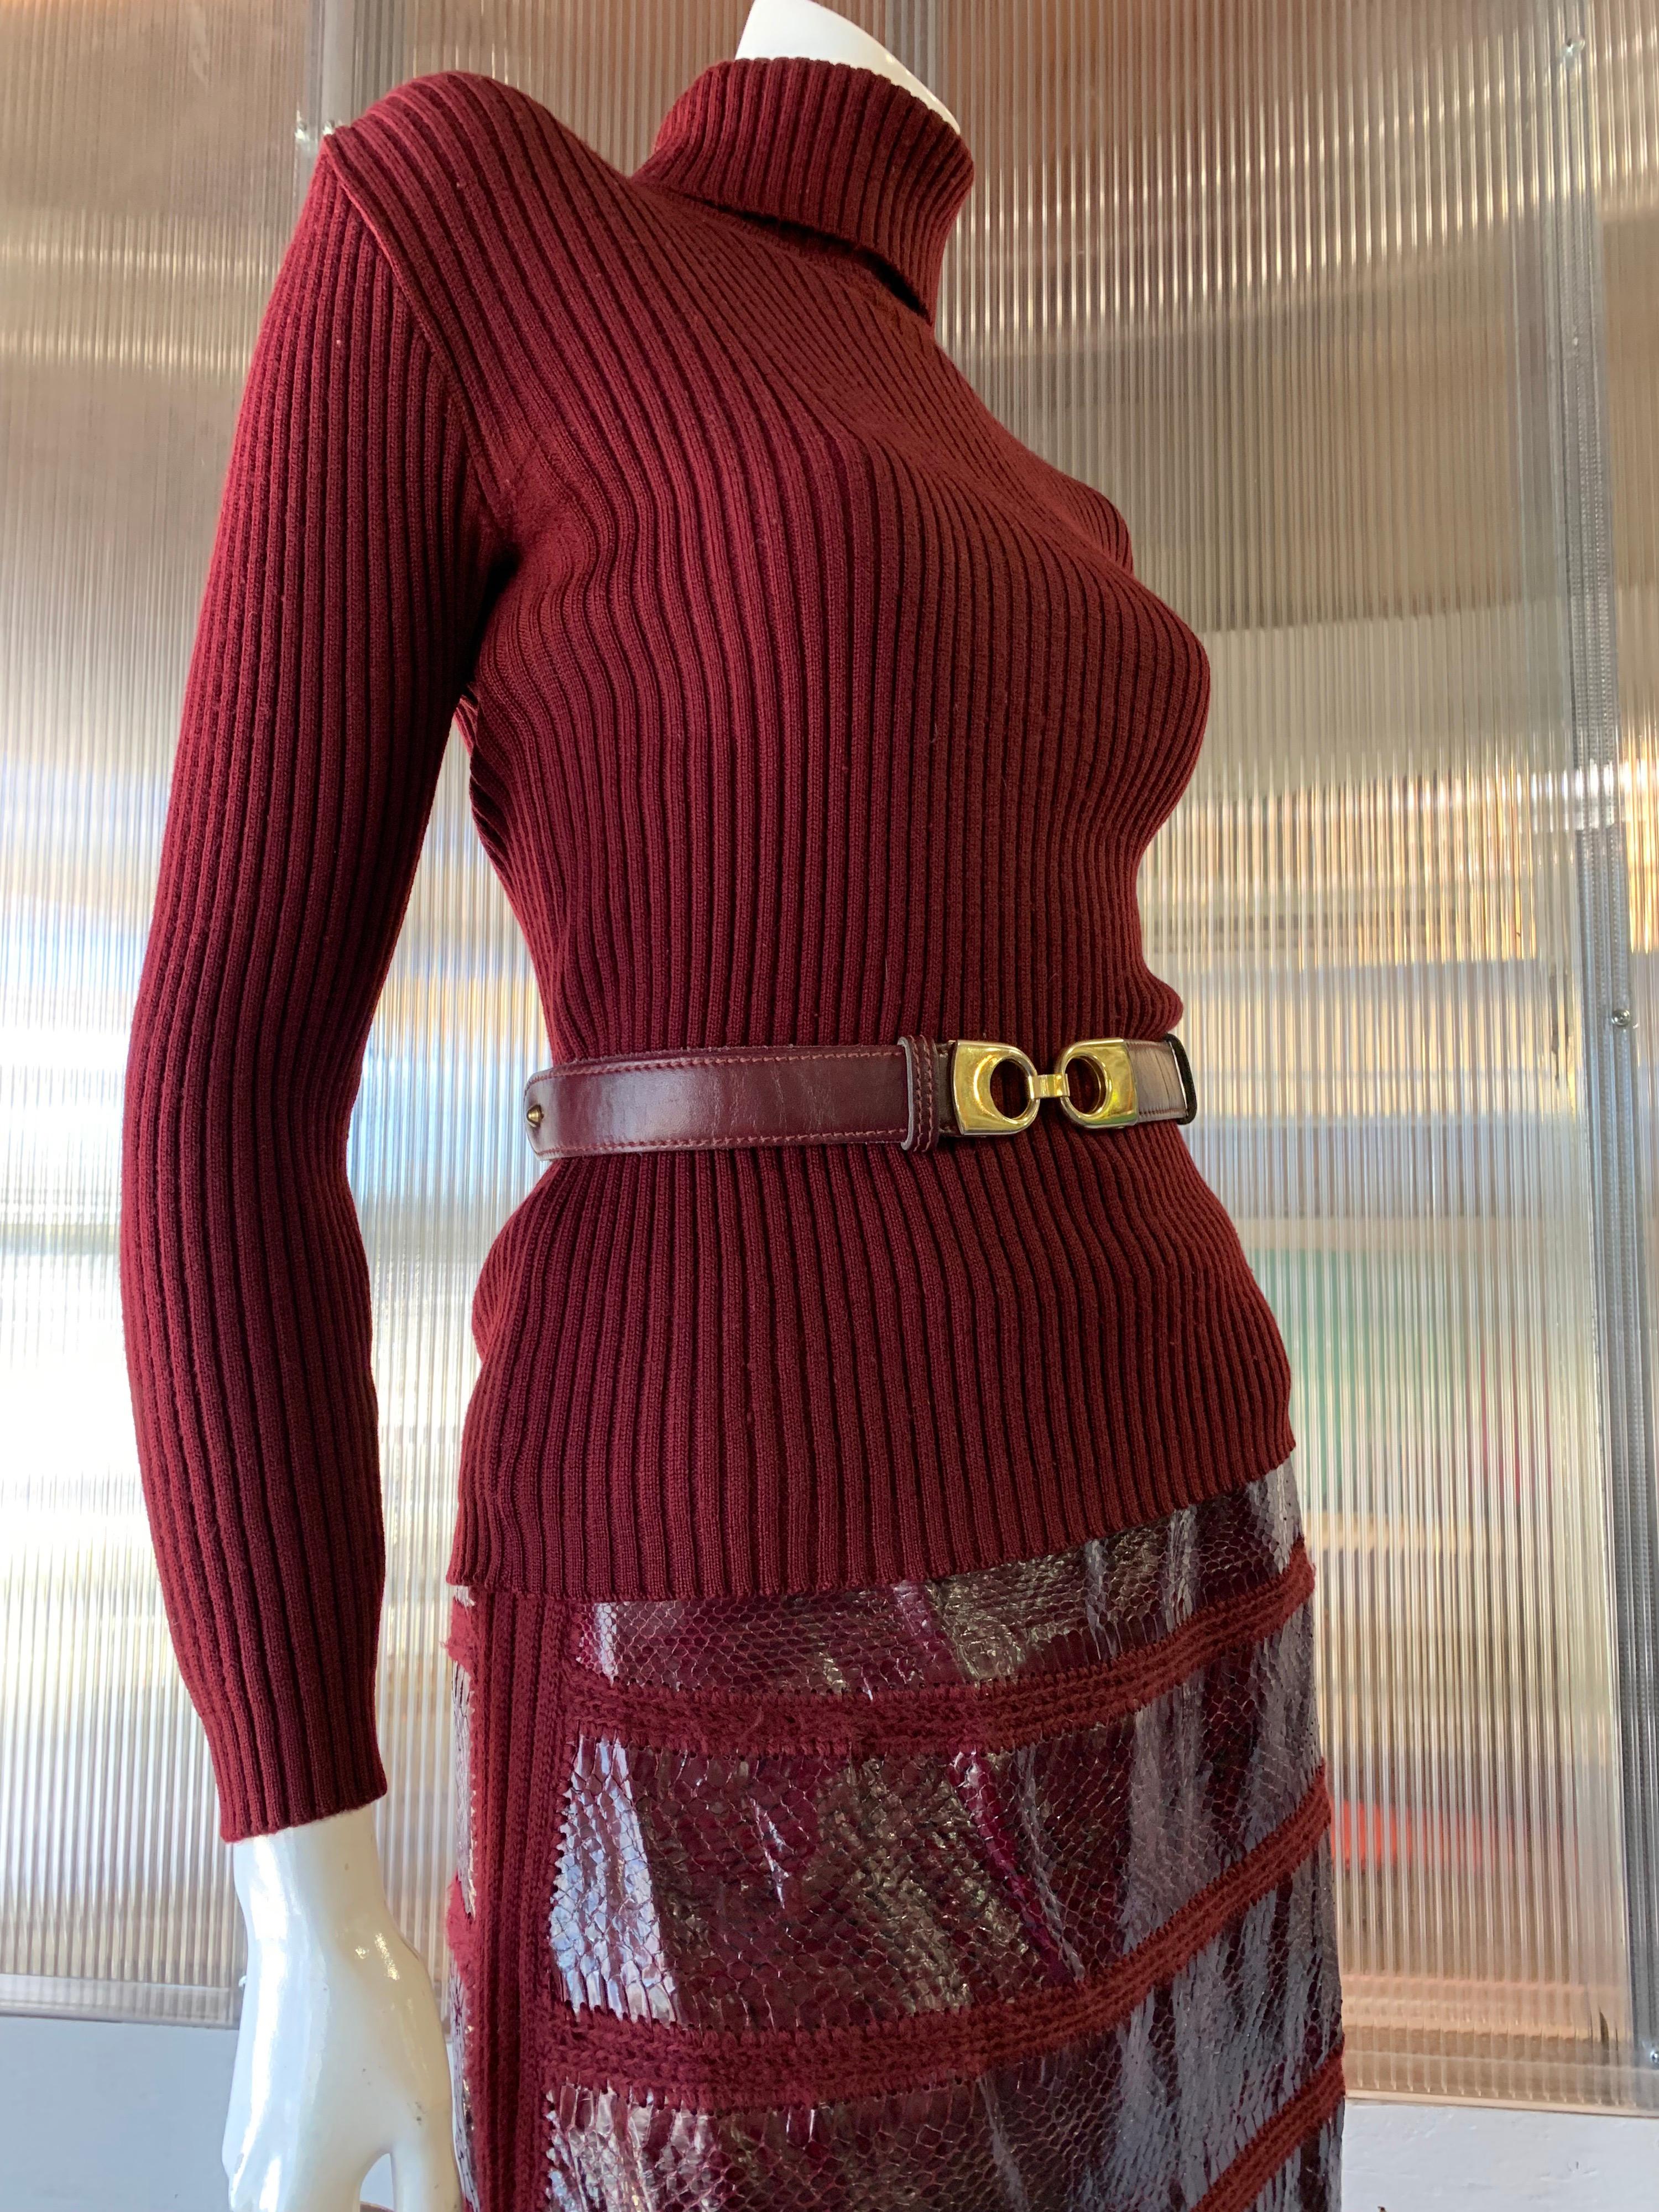 1960s J. Tiktinr 2-Piece Rib Knit Turtleneck Sweater & Snakeskin A-Line Skirt In Cranberry Color. Skirt is banded snakeskin joined by rows of knit. Lined skirt. Coordinating belt included.